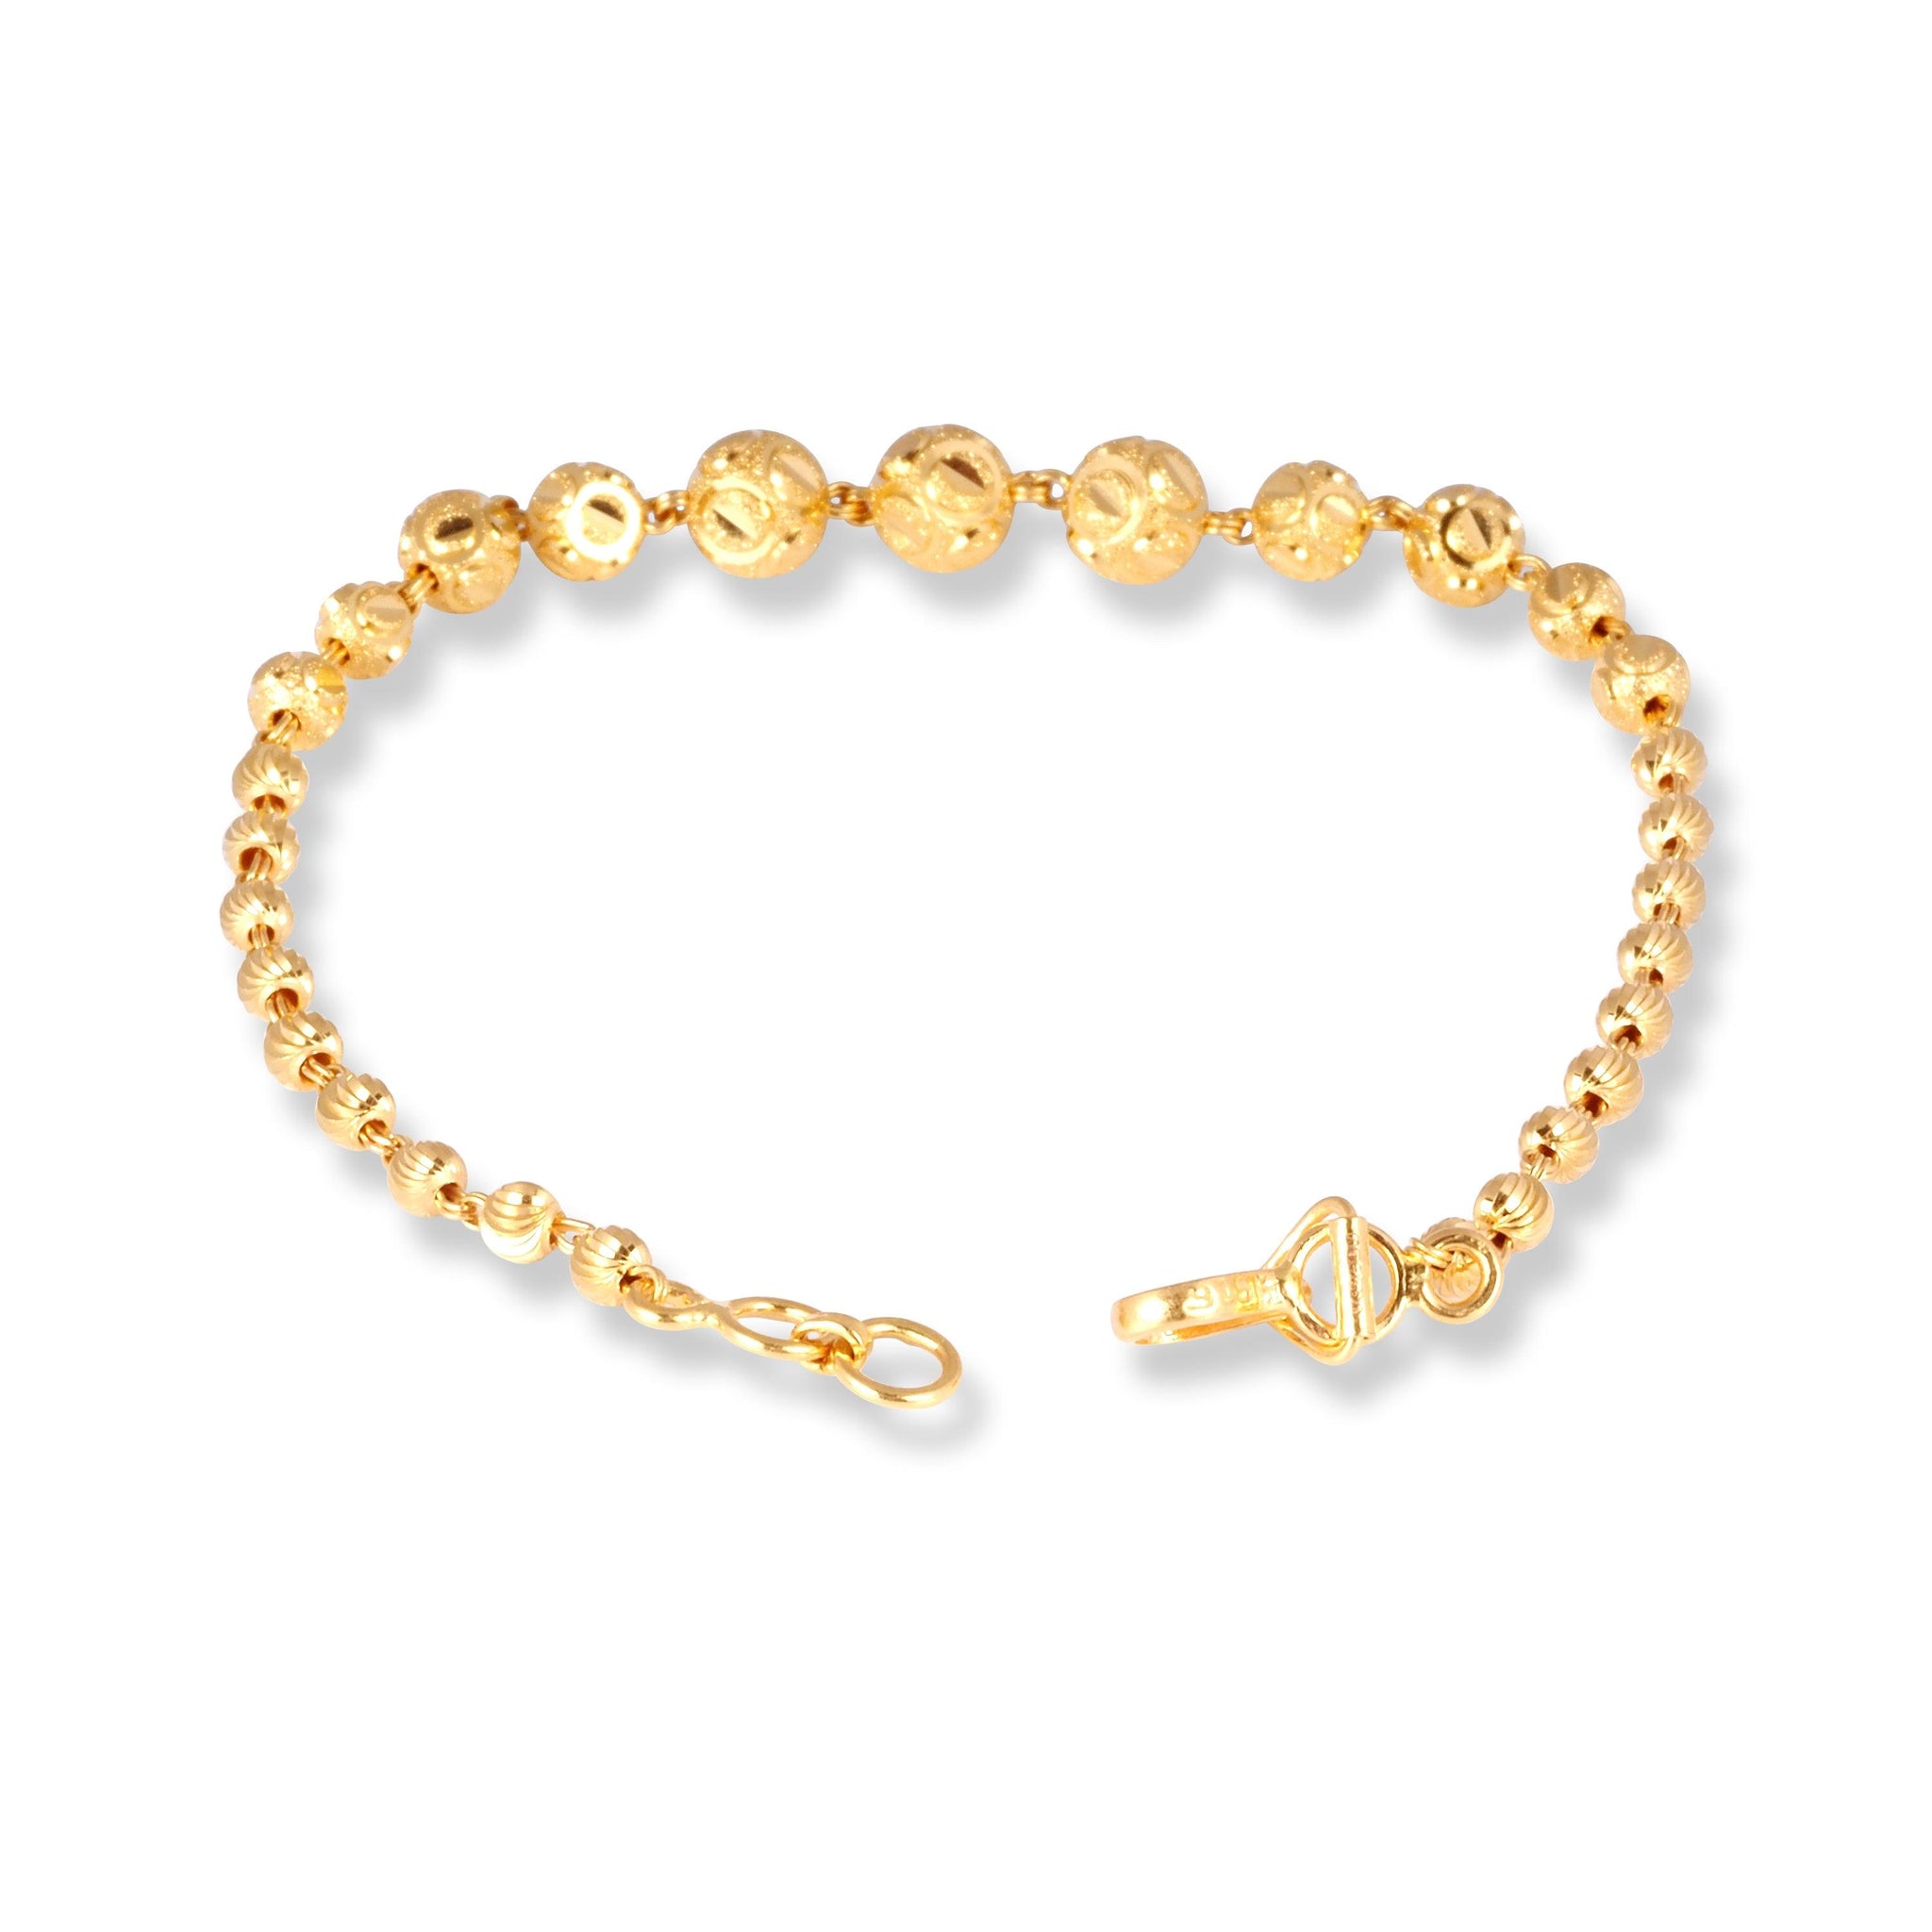 22ct Gold Ladies Beaded Bracelet with Hook Clasp LBR-7151